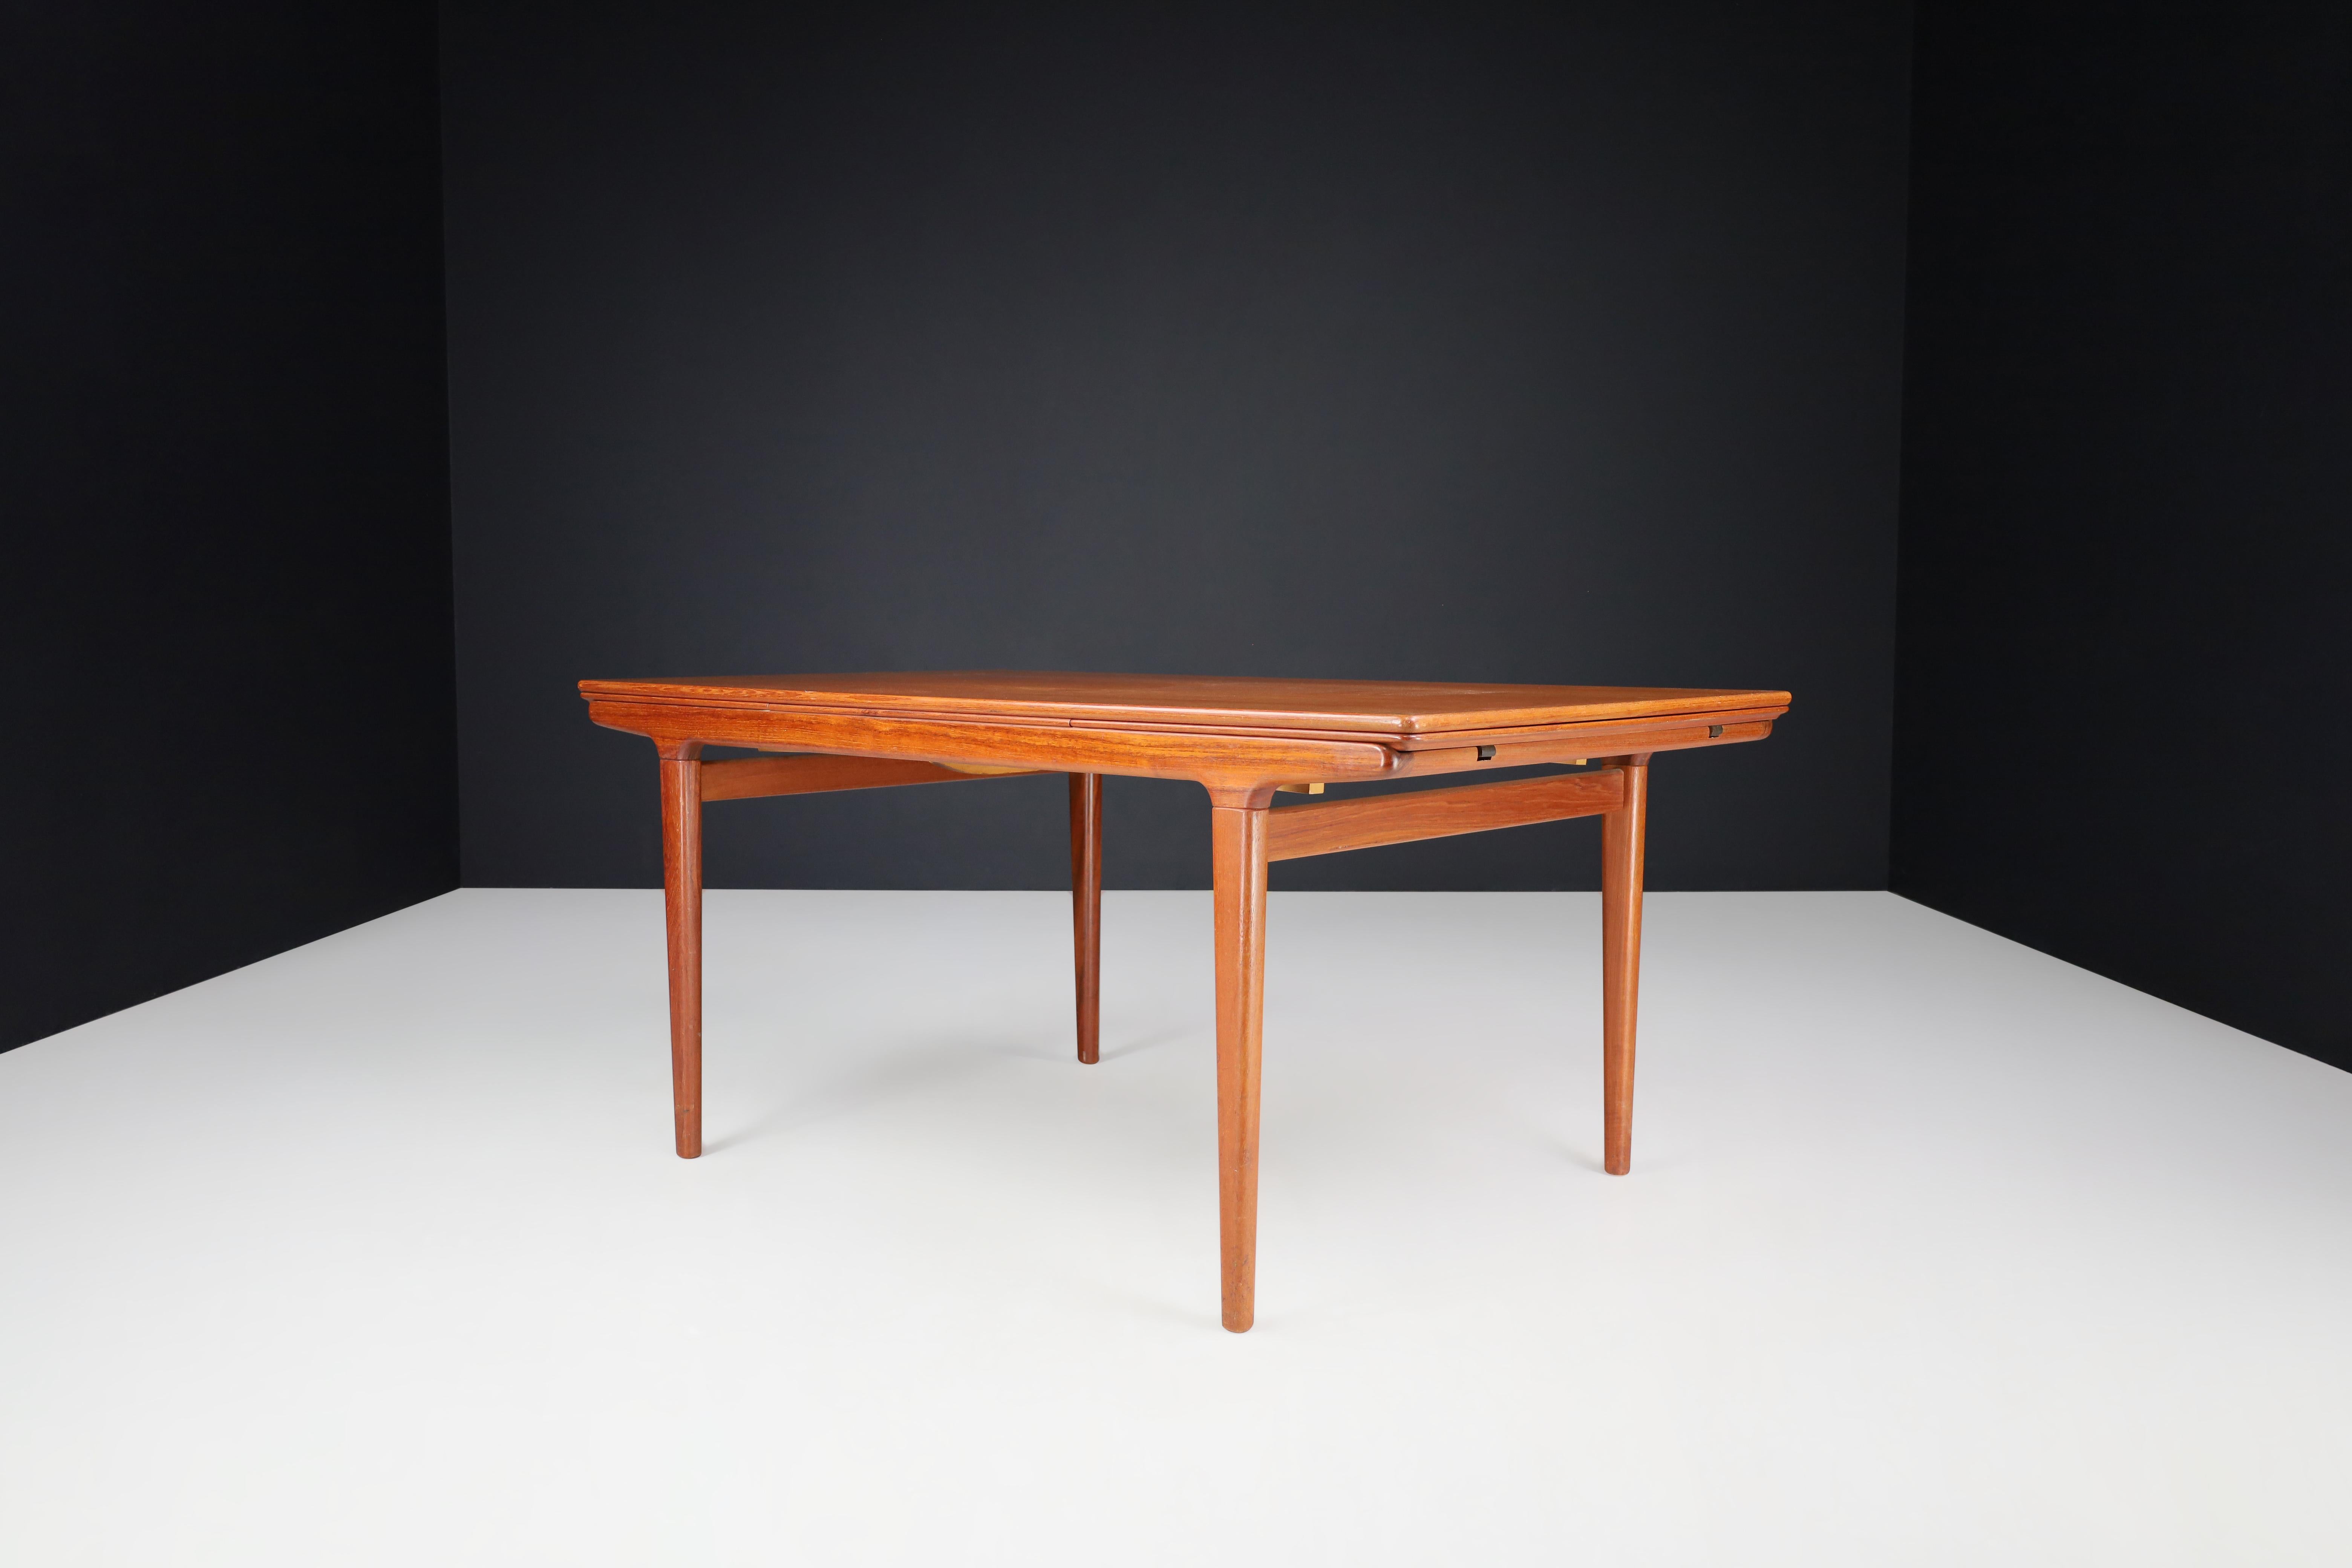 Niels Møller Teak Extension Dining Table Denmark, 1950s

Created by Niels Møller, this modern Danish extension table is famous for its beautifully tapered lines and the warmth of the teak. Two concealed leaves easily slide out, allowing ten